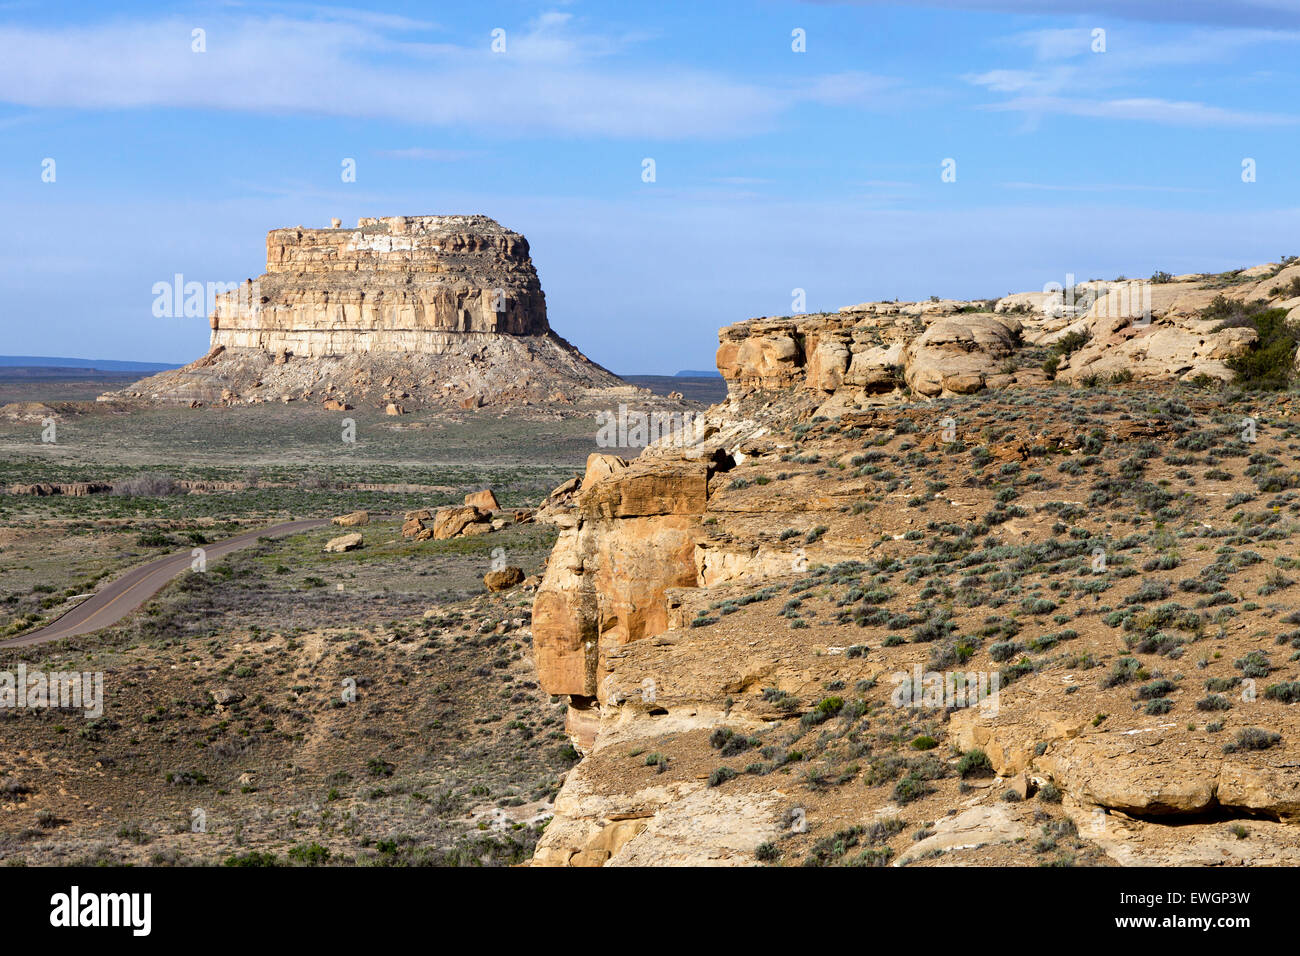 The 380 foot tall Fajada Butte rises above the valley floor in Chaco Culture National Historic Park. The ruins of about two doze Stock Photo